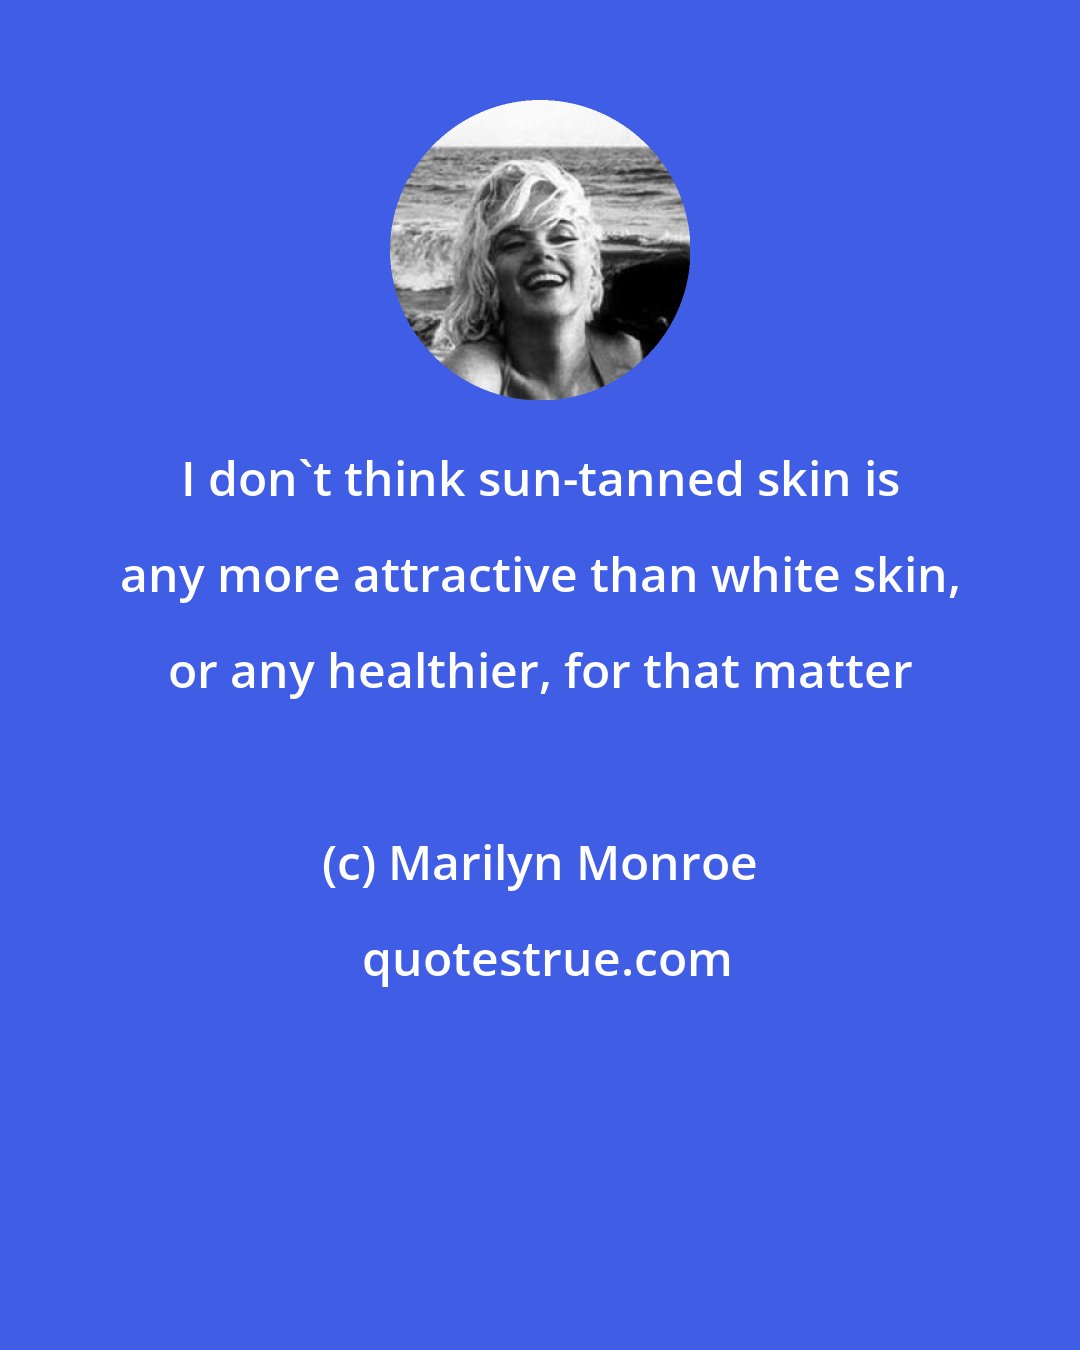 Marilyn Monroe: I don't think sun-tanned skin is any more attractive than white skin, or any healthier, for that matter